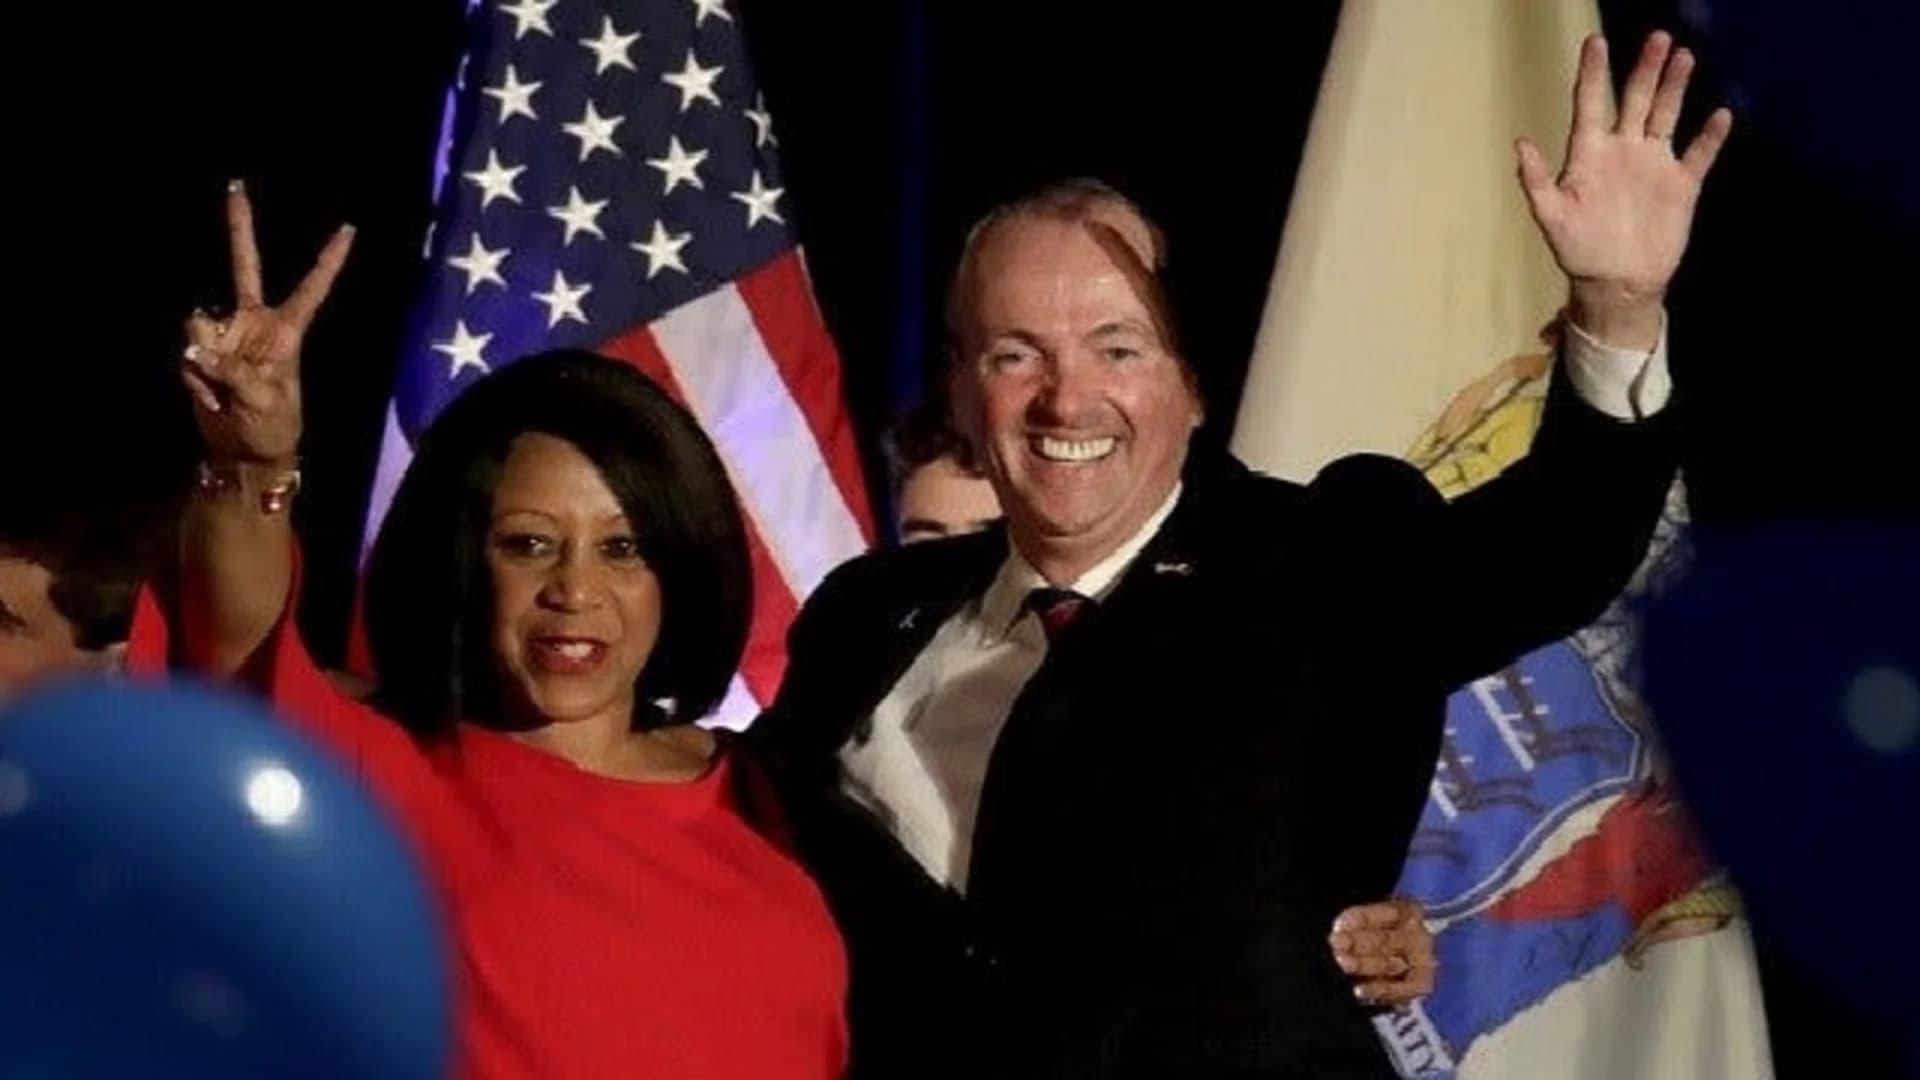 Murphy to replace Christie as New Jersey’s governor